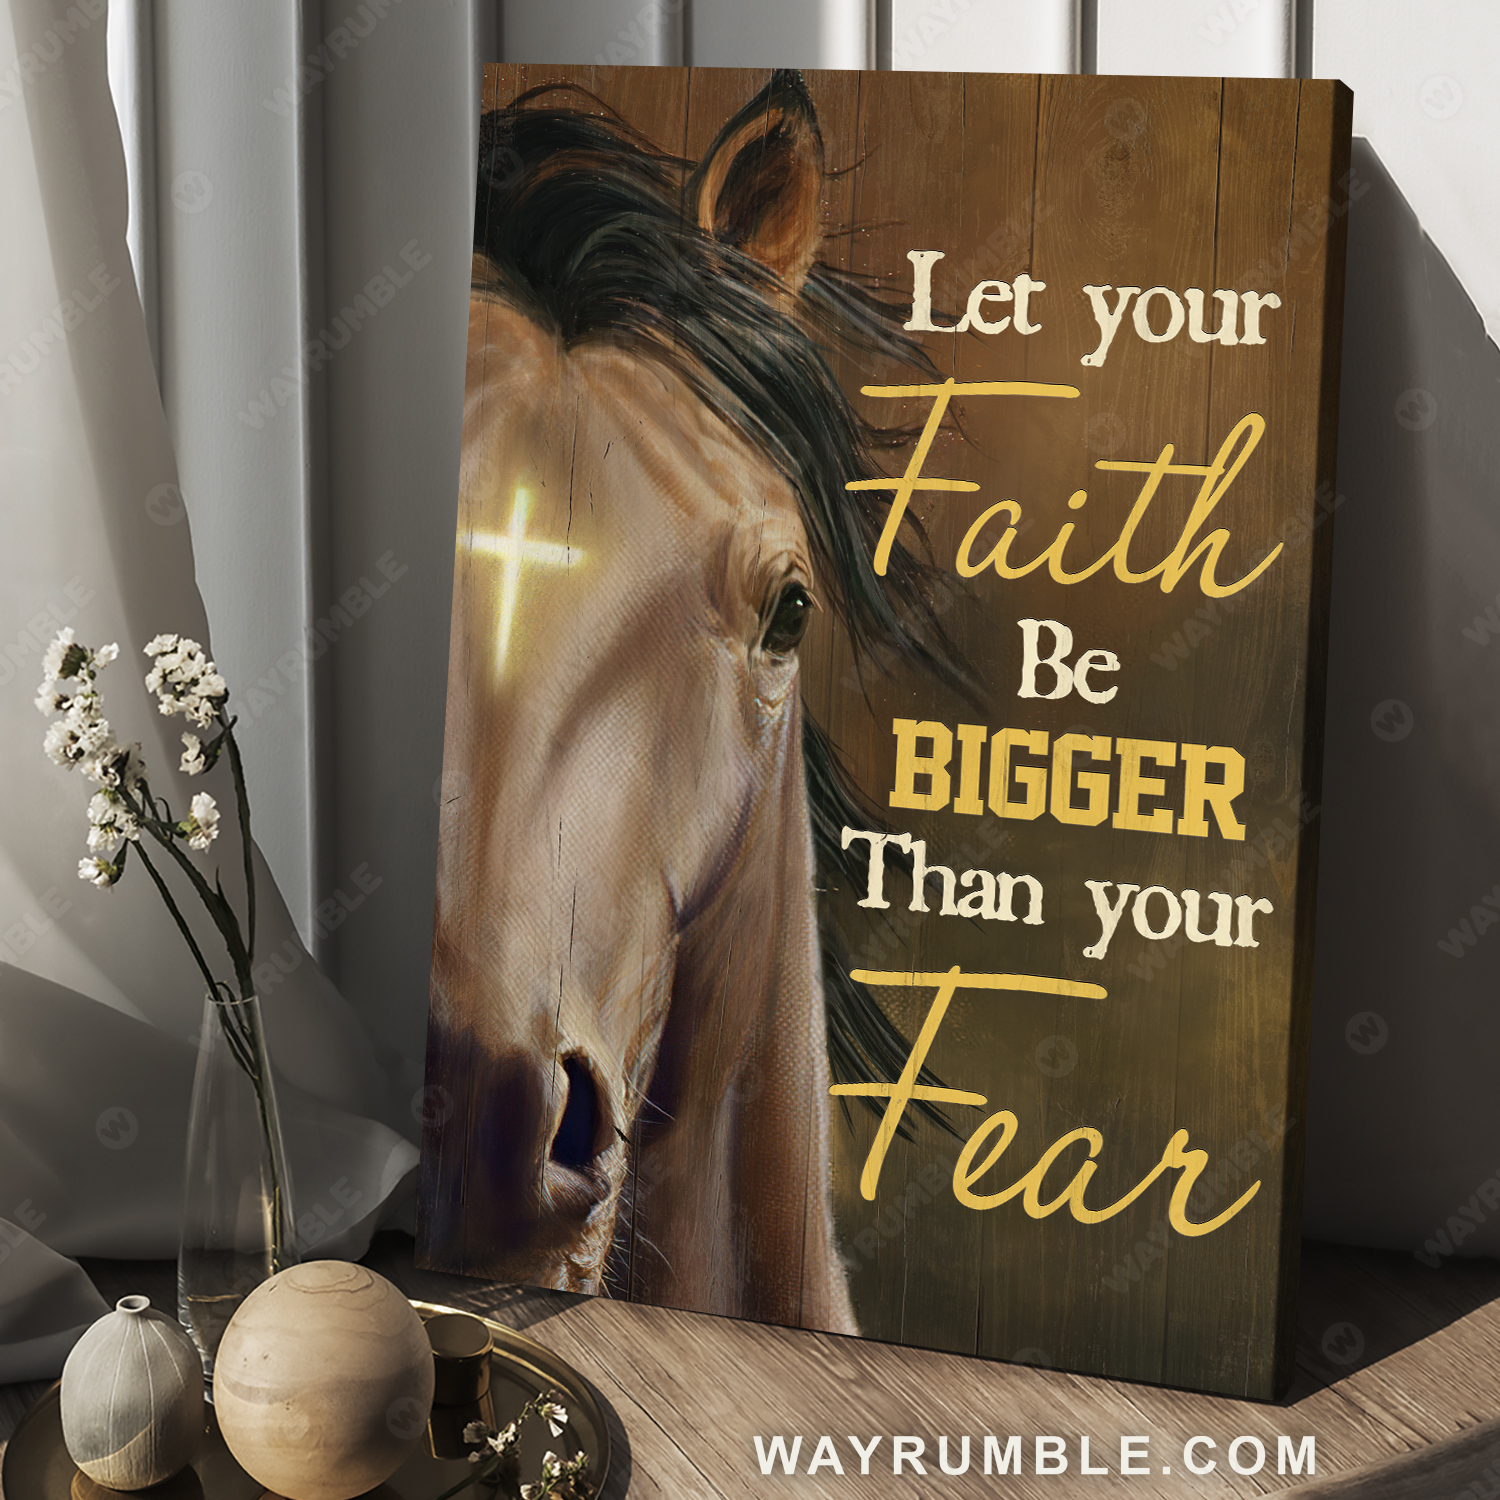 Face of horse, Jesus painting, Cross symbol, Let your faith be bigger than your fear - Jesus Portrait Canvas Prints, Christian Wall Art